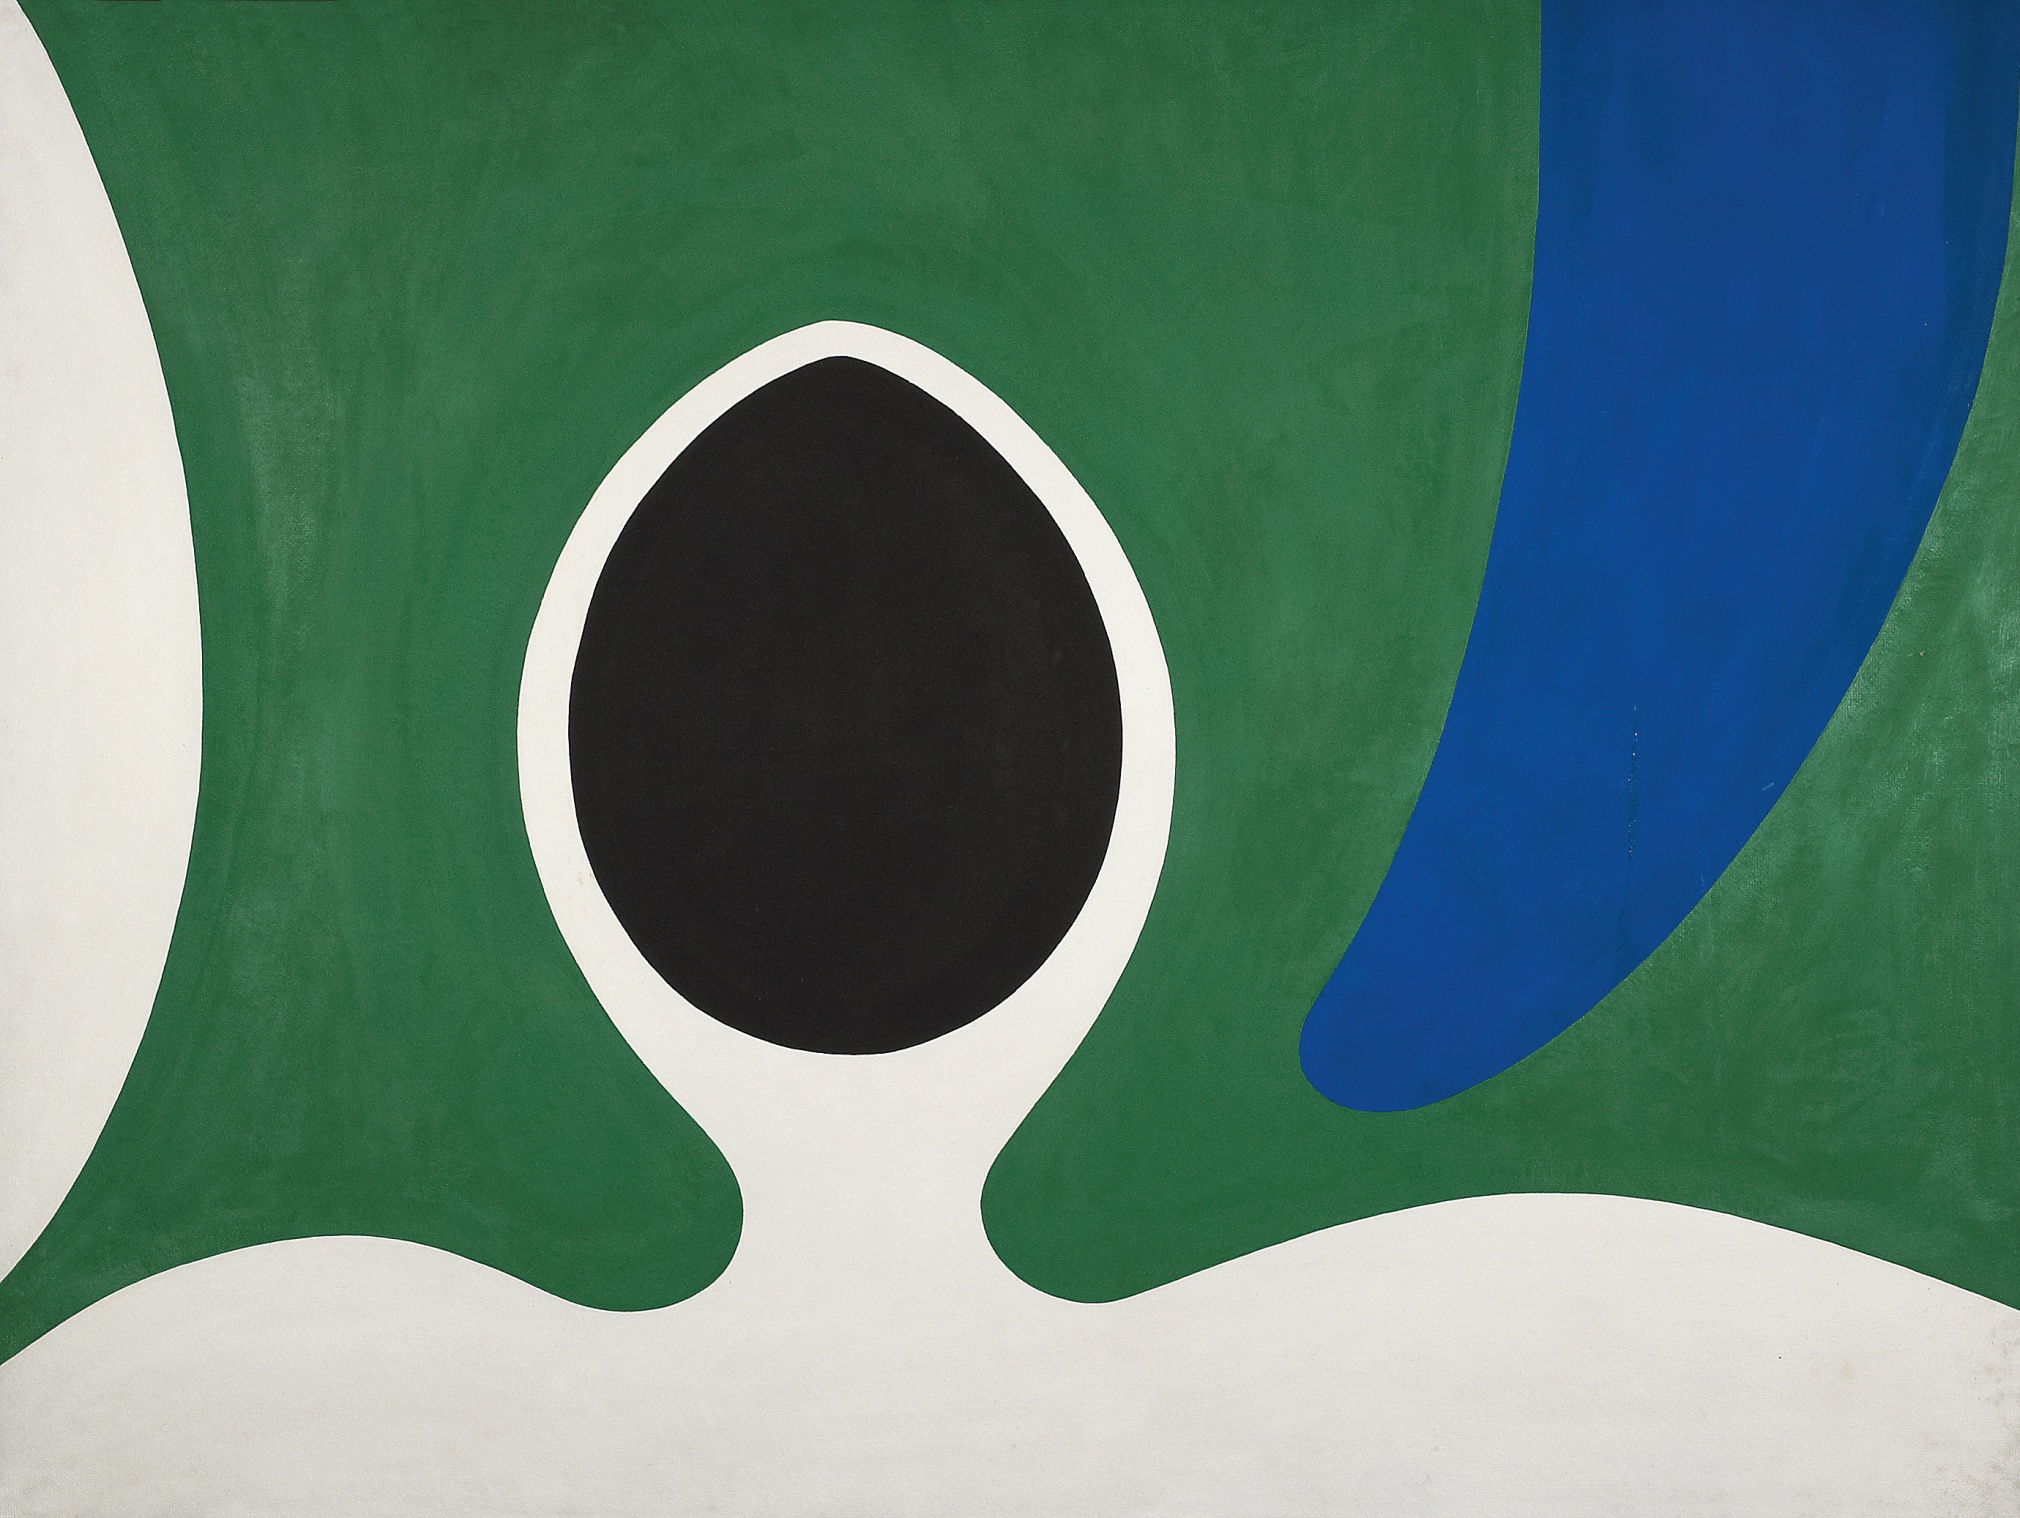 Source I, a painting of a black avocado seed shape surrounded by green and blue planes of color against a white background